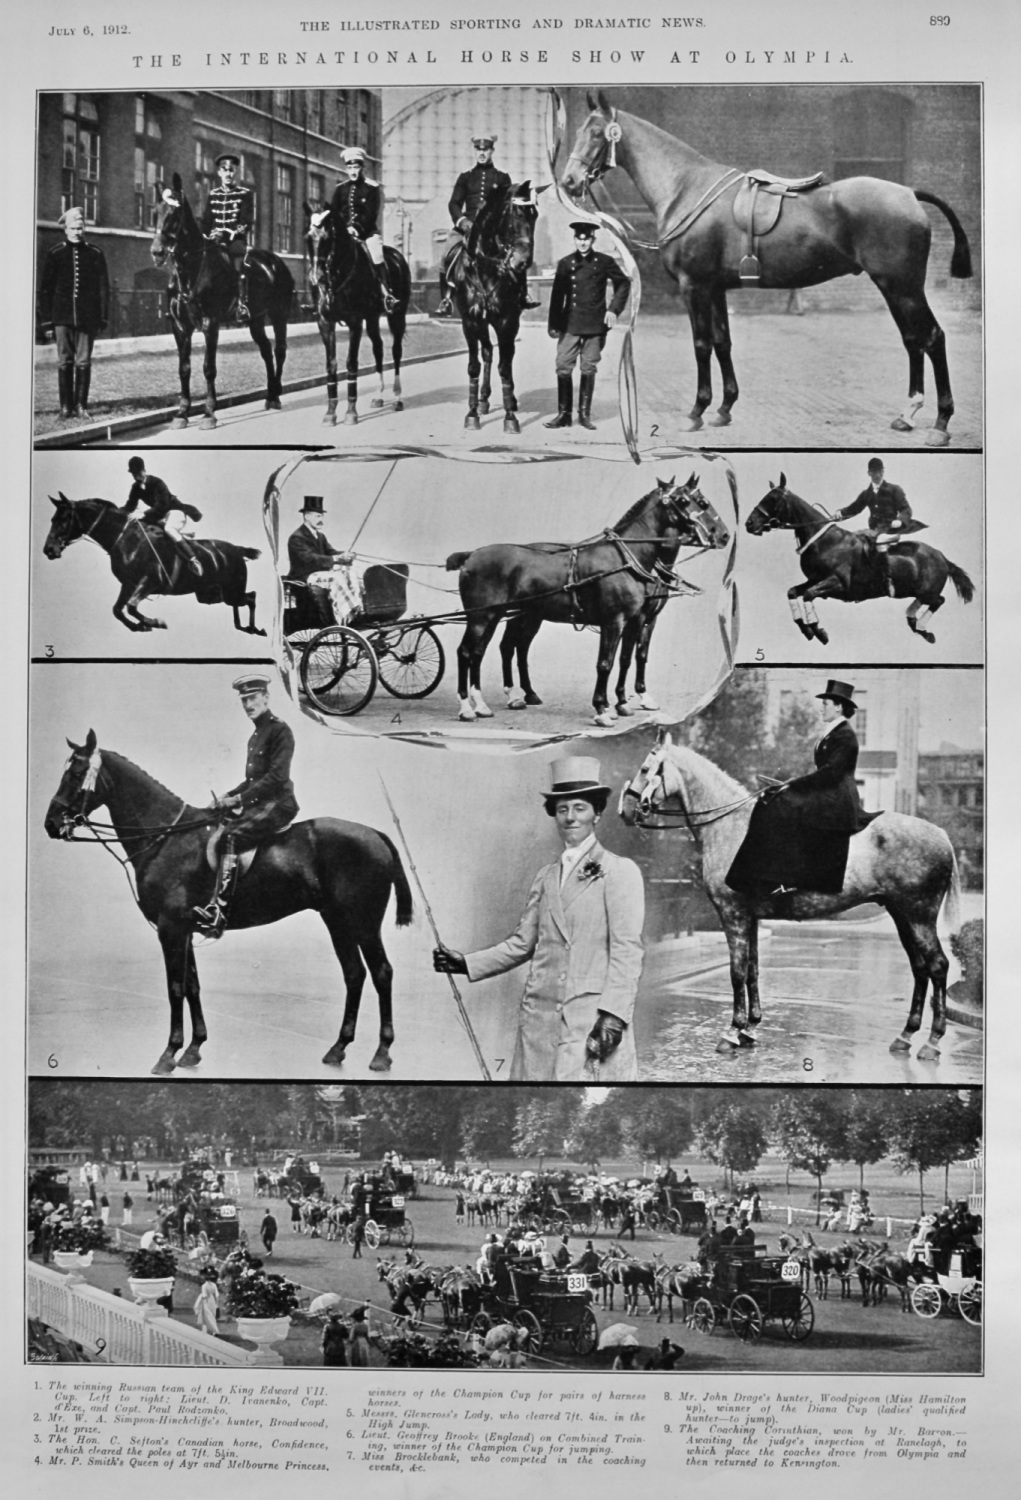 The International Horse Show at Olympia.  1912.